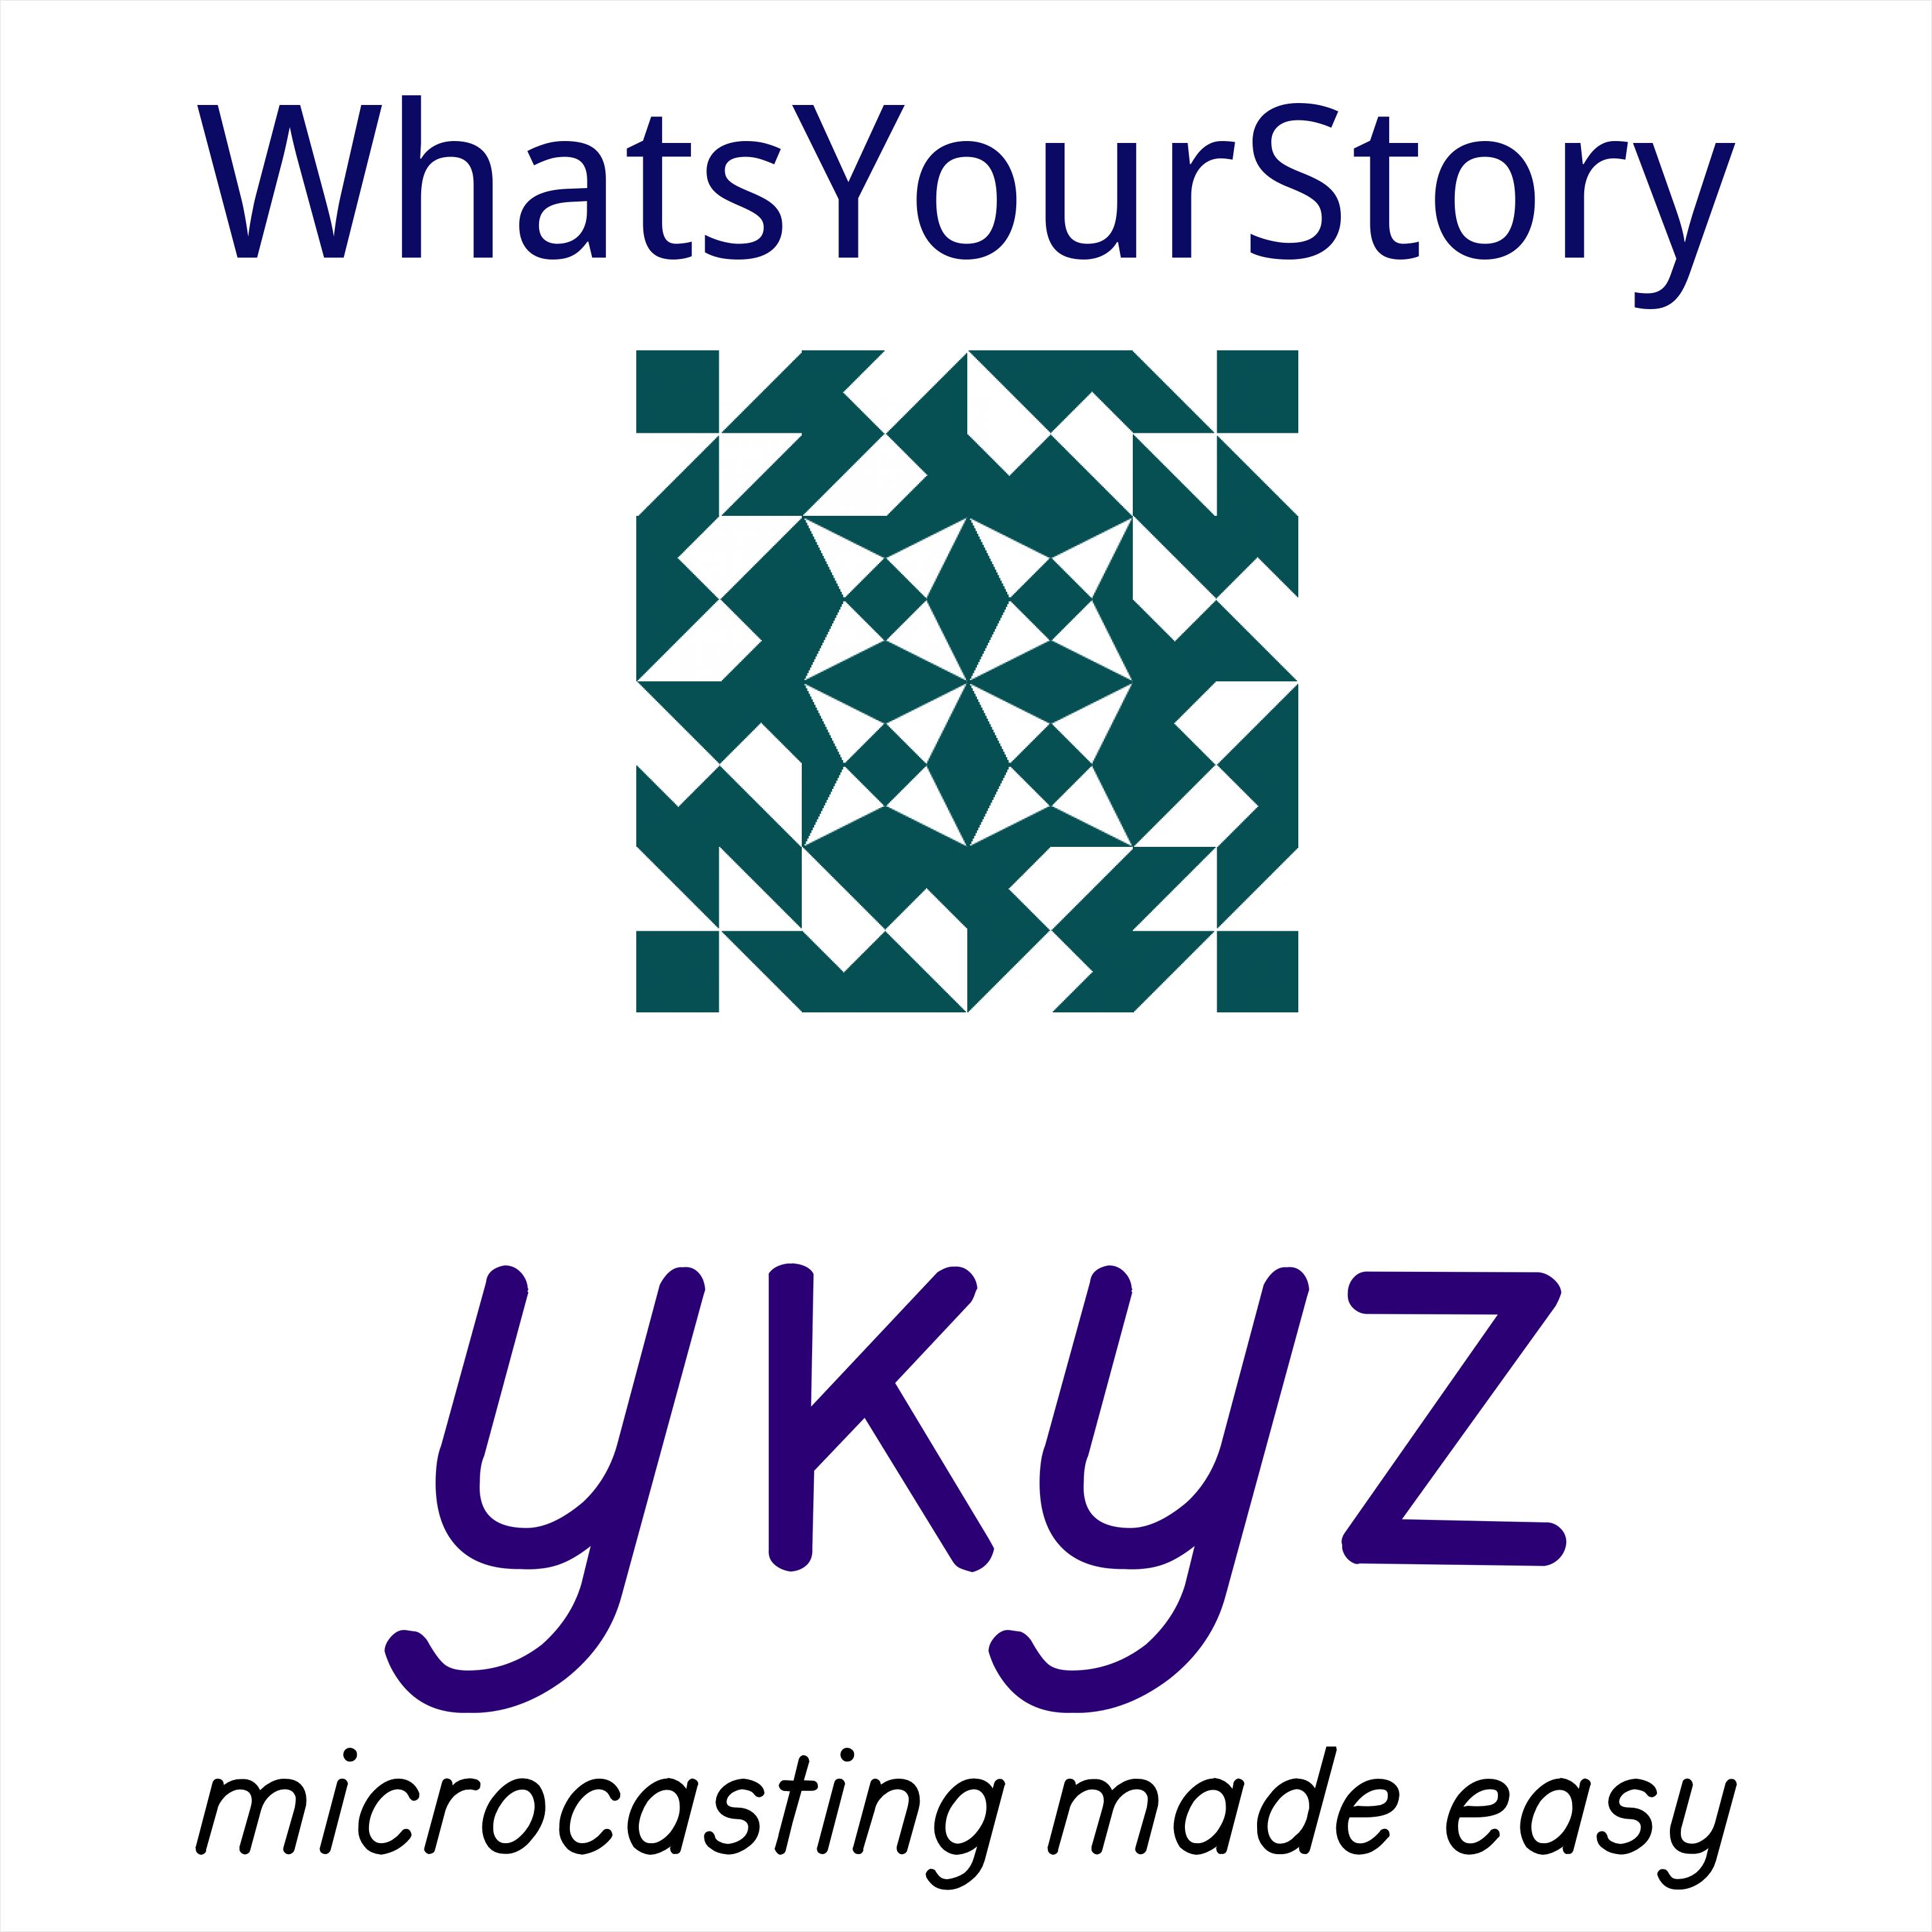 WhatsYourStory microcast